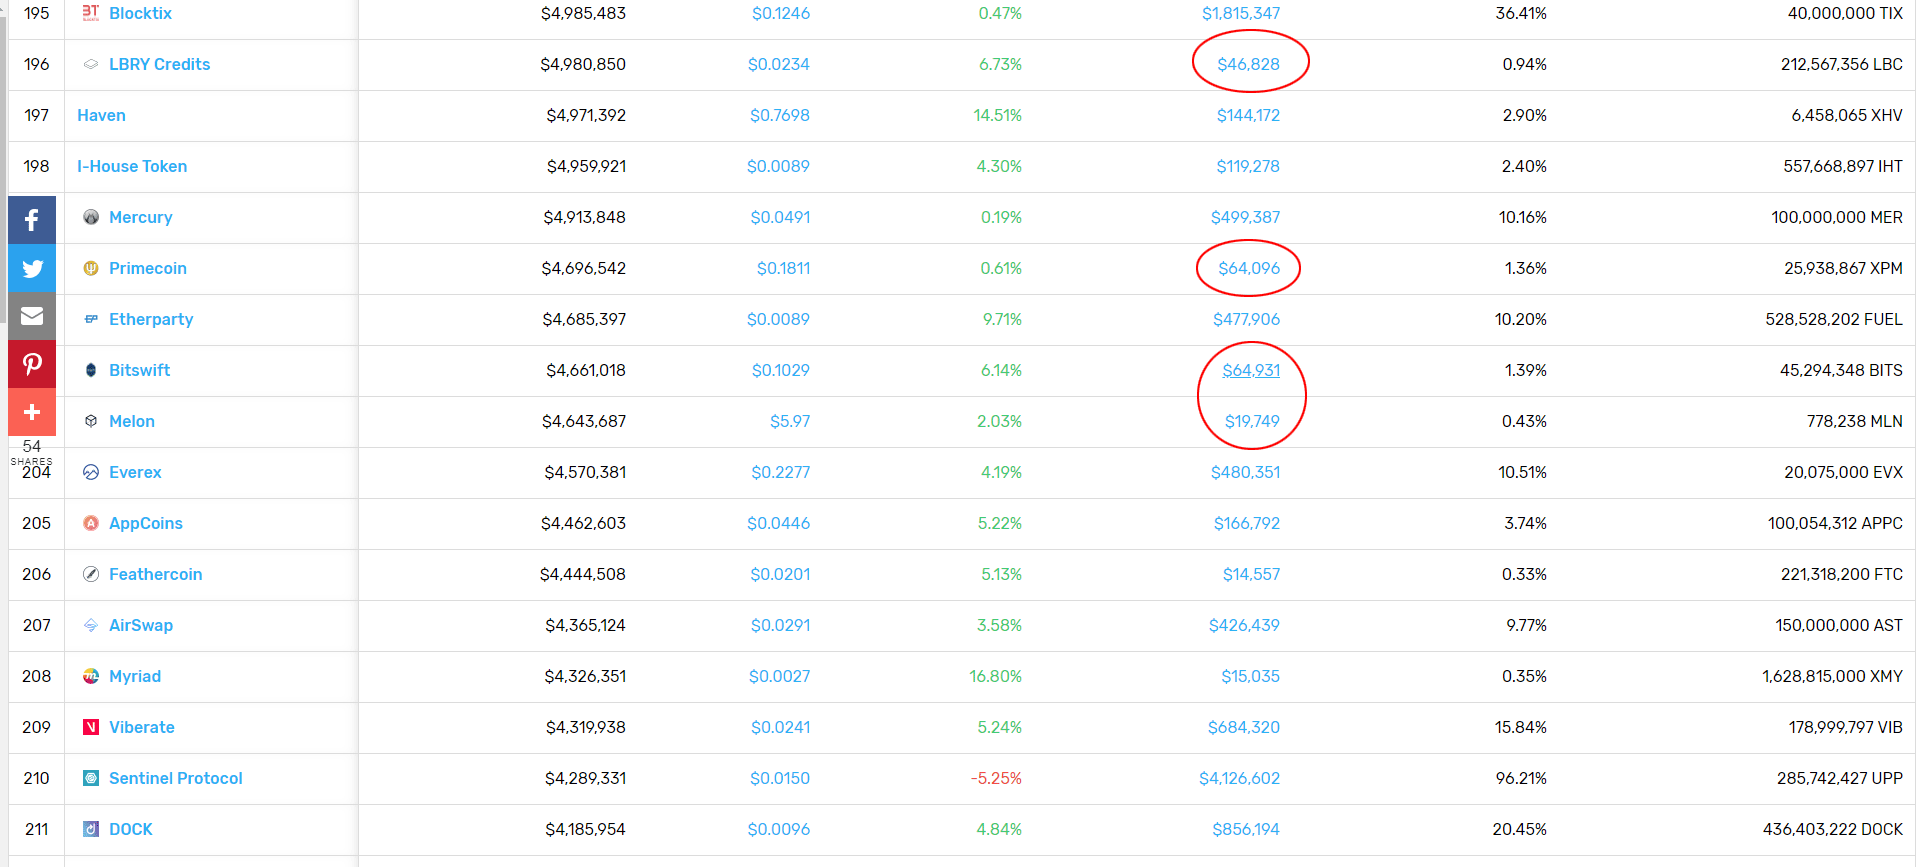 Coins with low daily volume.